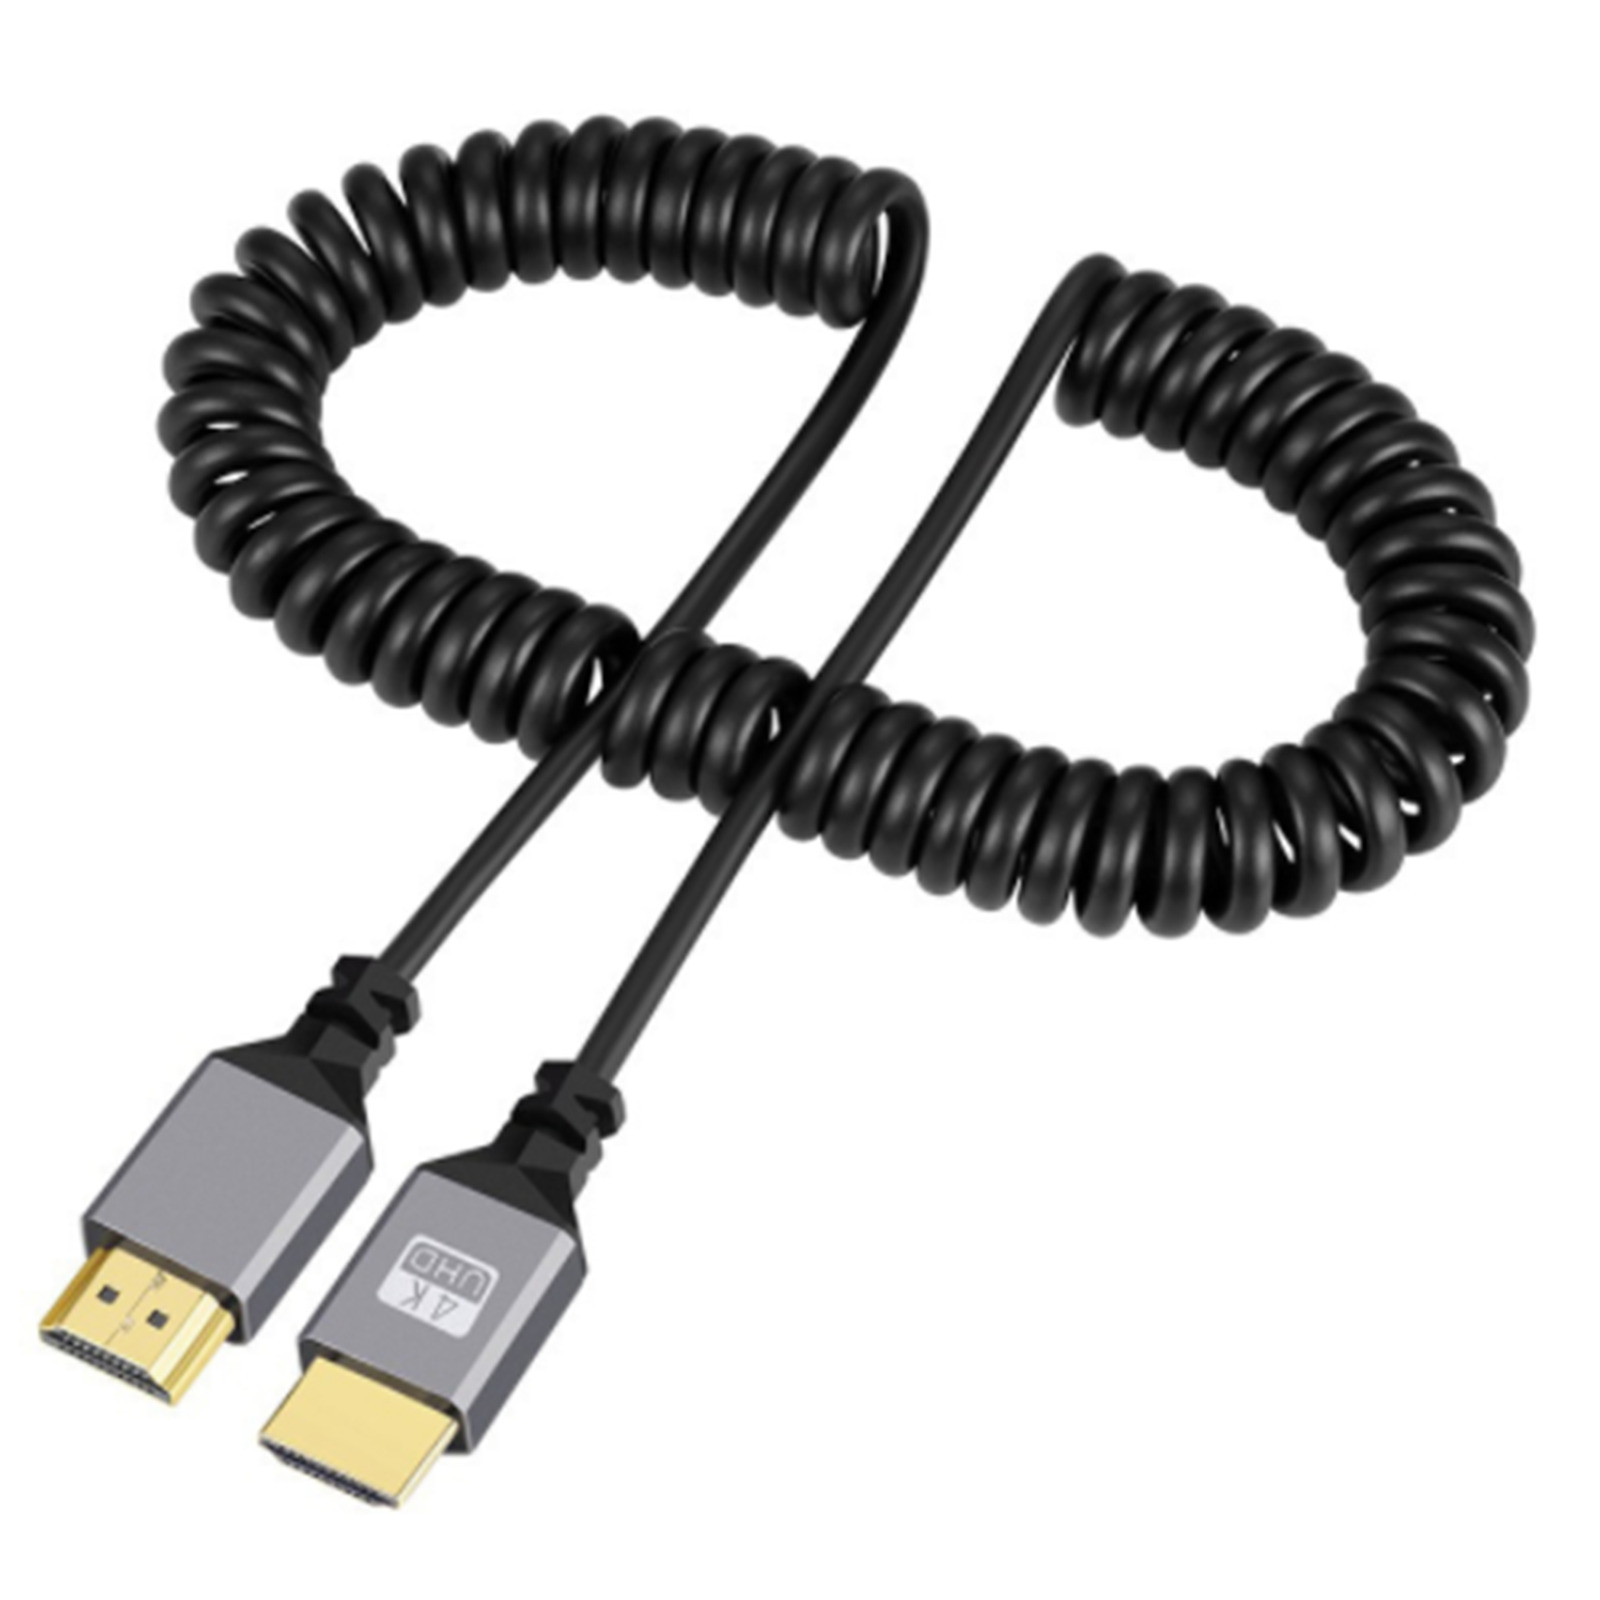 Camcorder to Monitor Hd-compatible Port Converter 4k60hz Resolution Cable